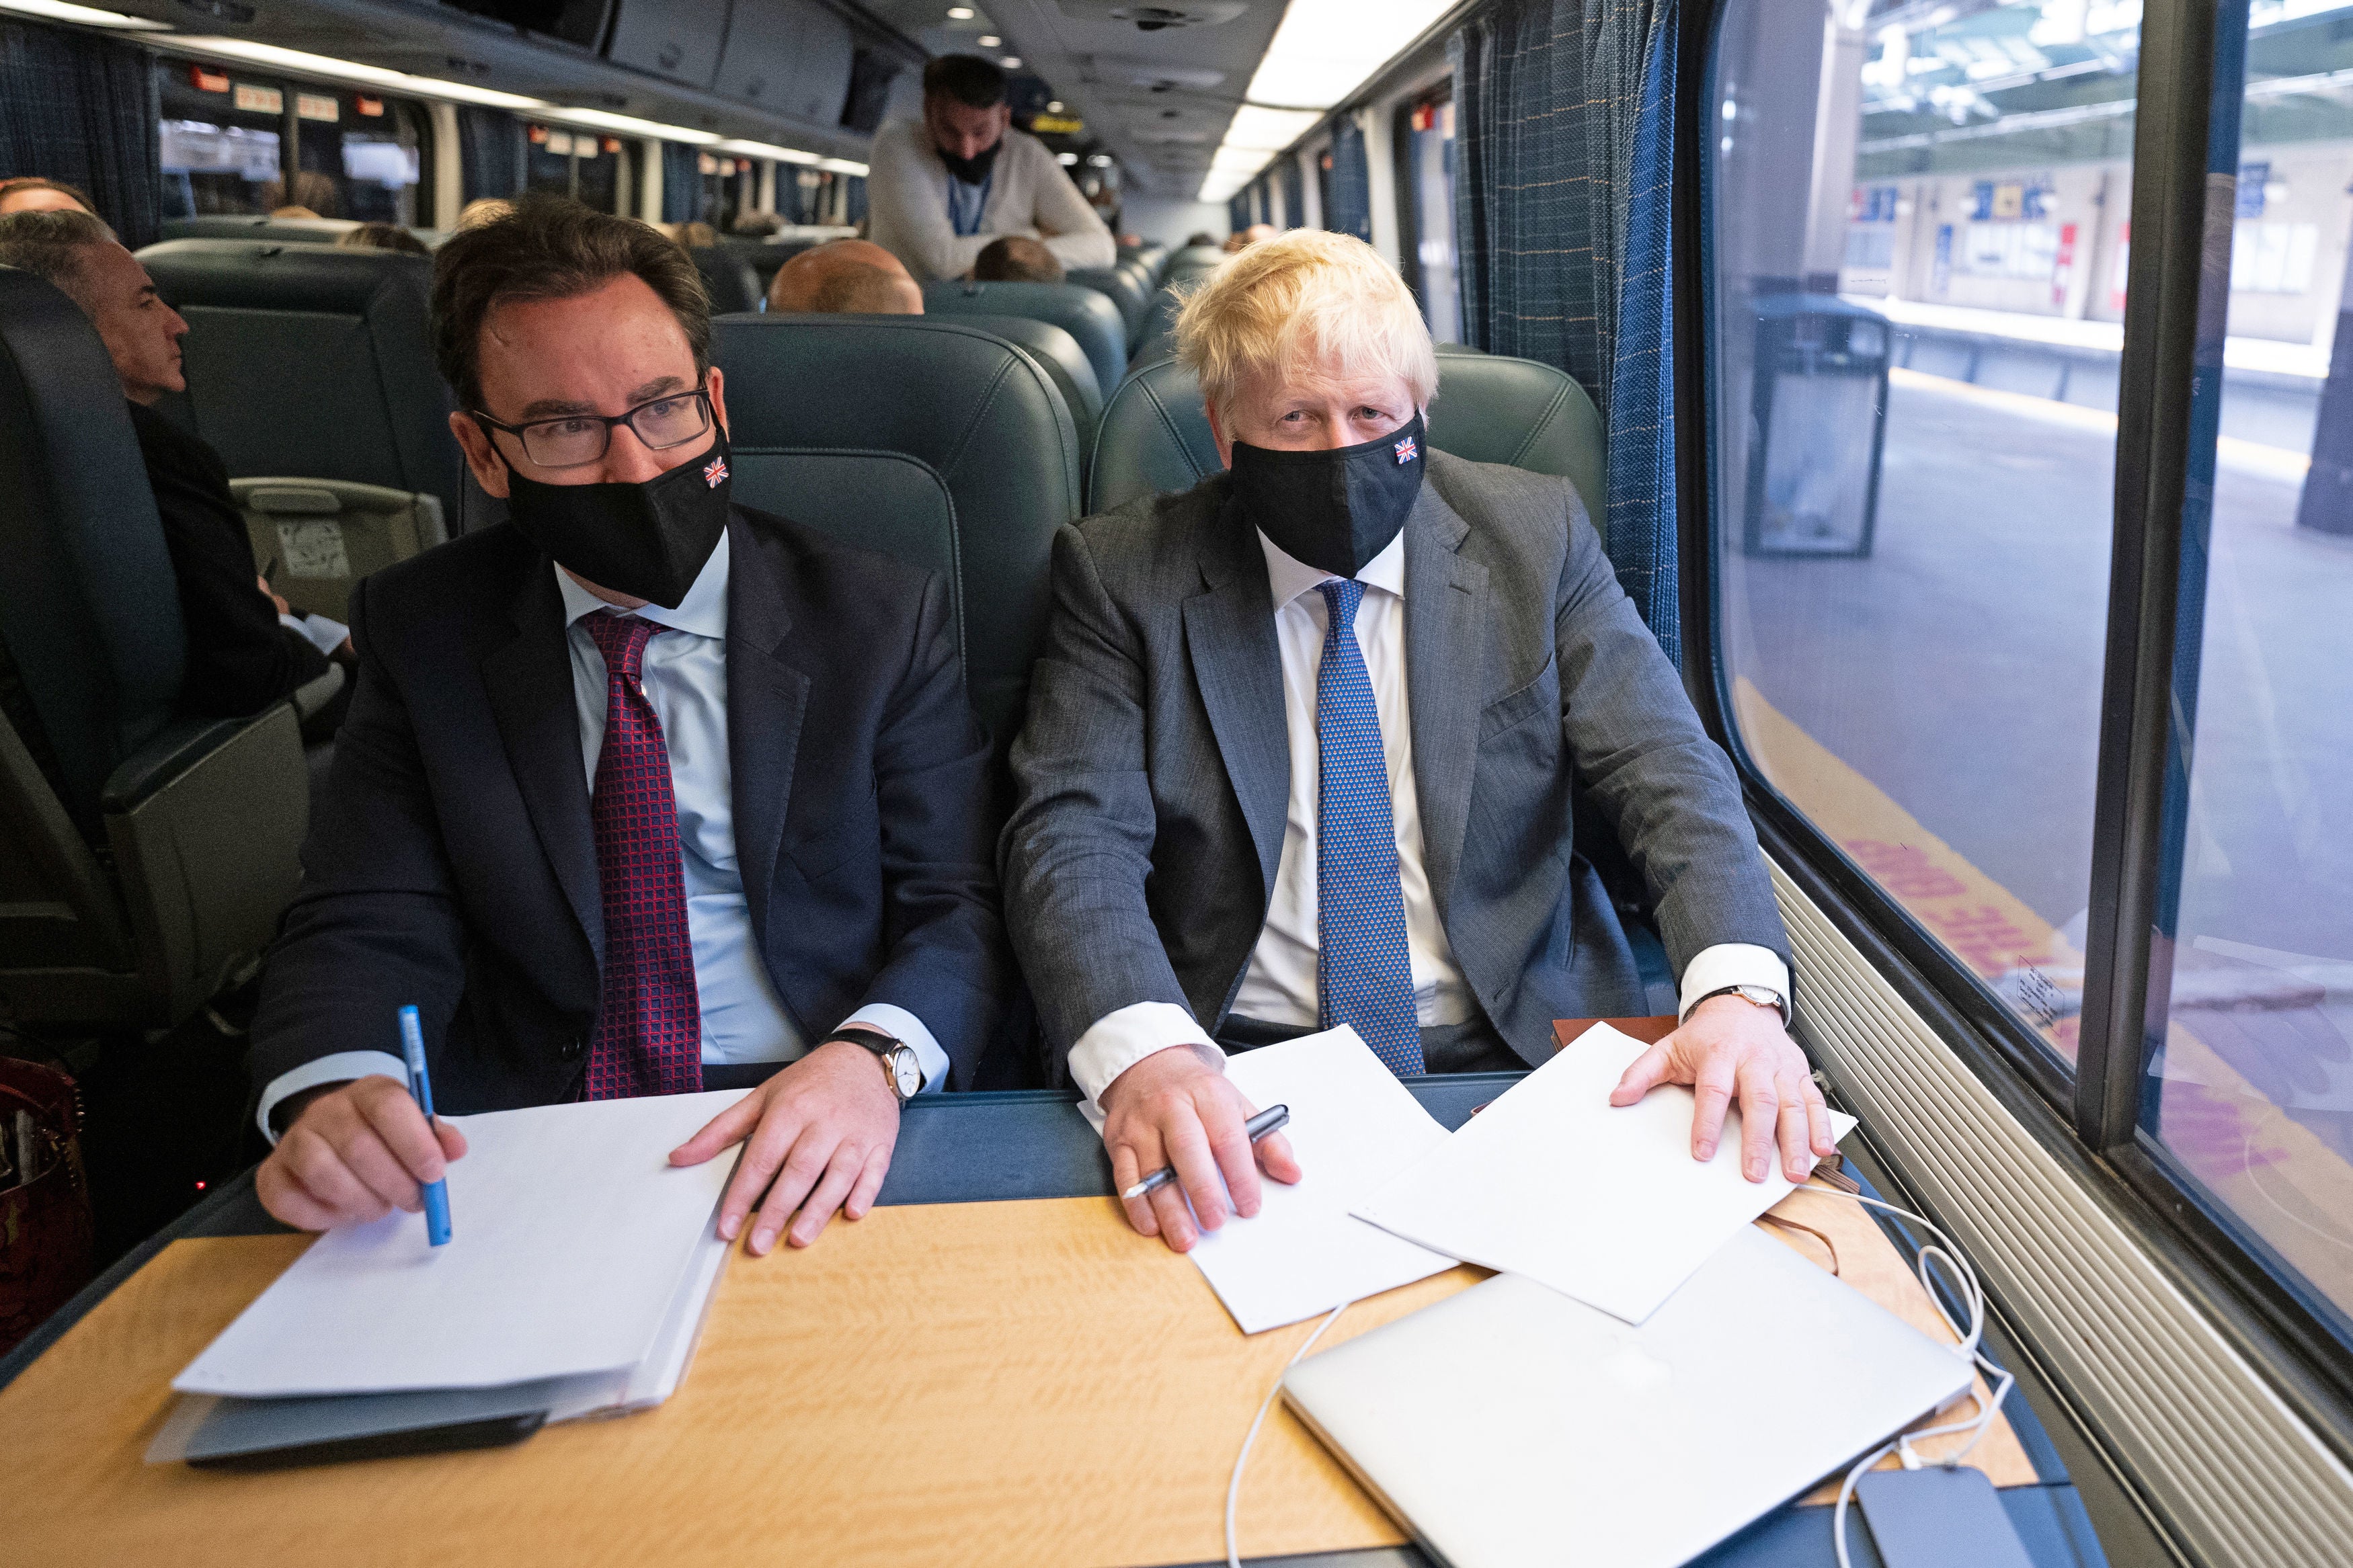 Prime Minister Boris Johnson spoke to reporters about Universal Credit while travelling on a train in the US (Stefan Rousseau/PA)